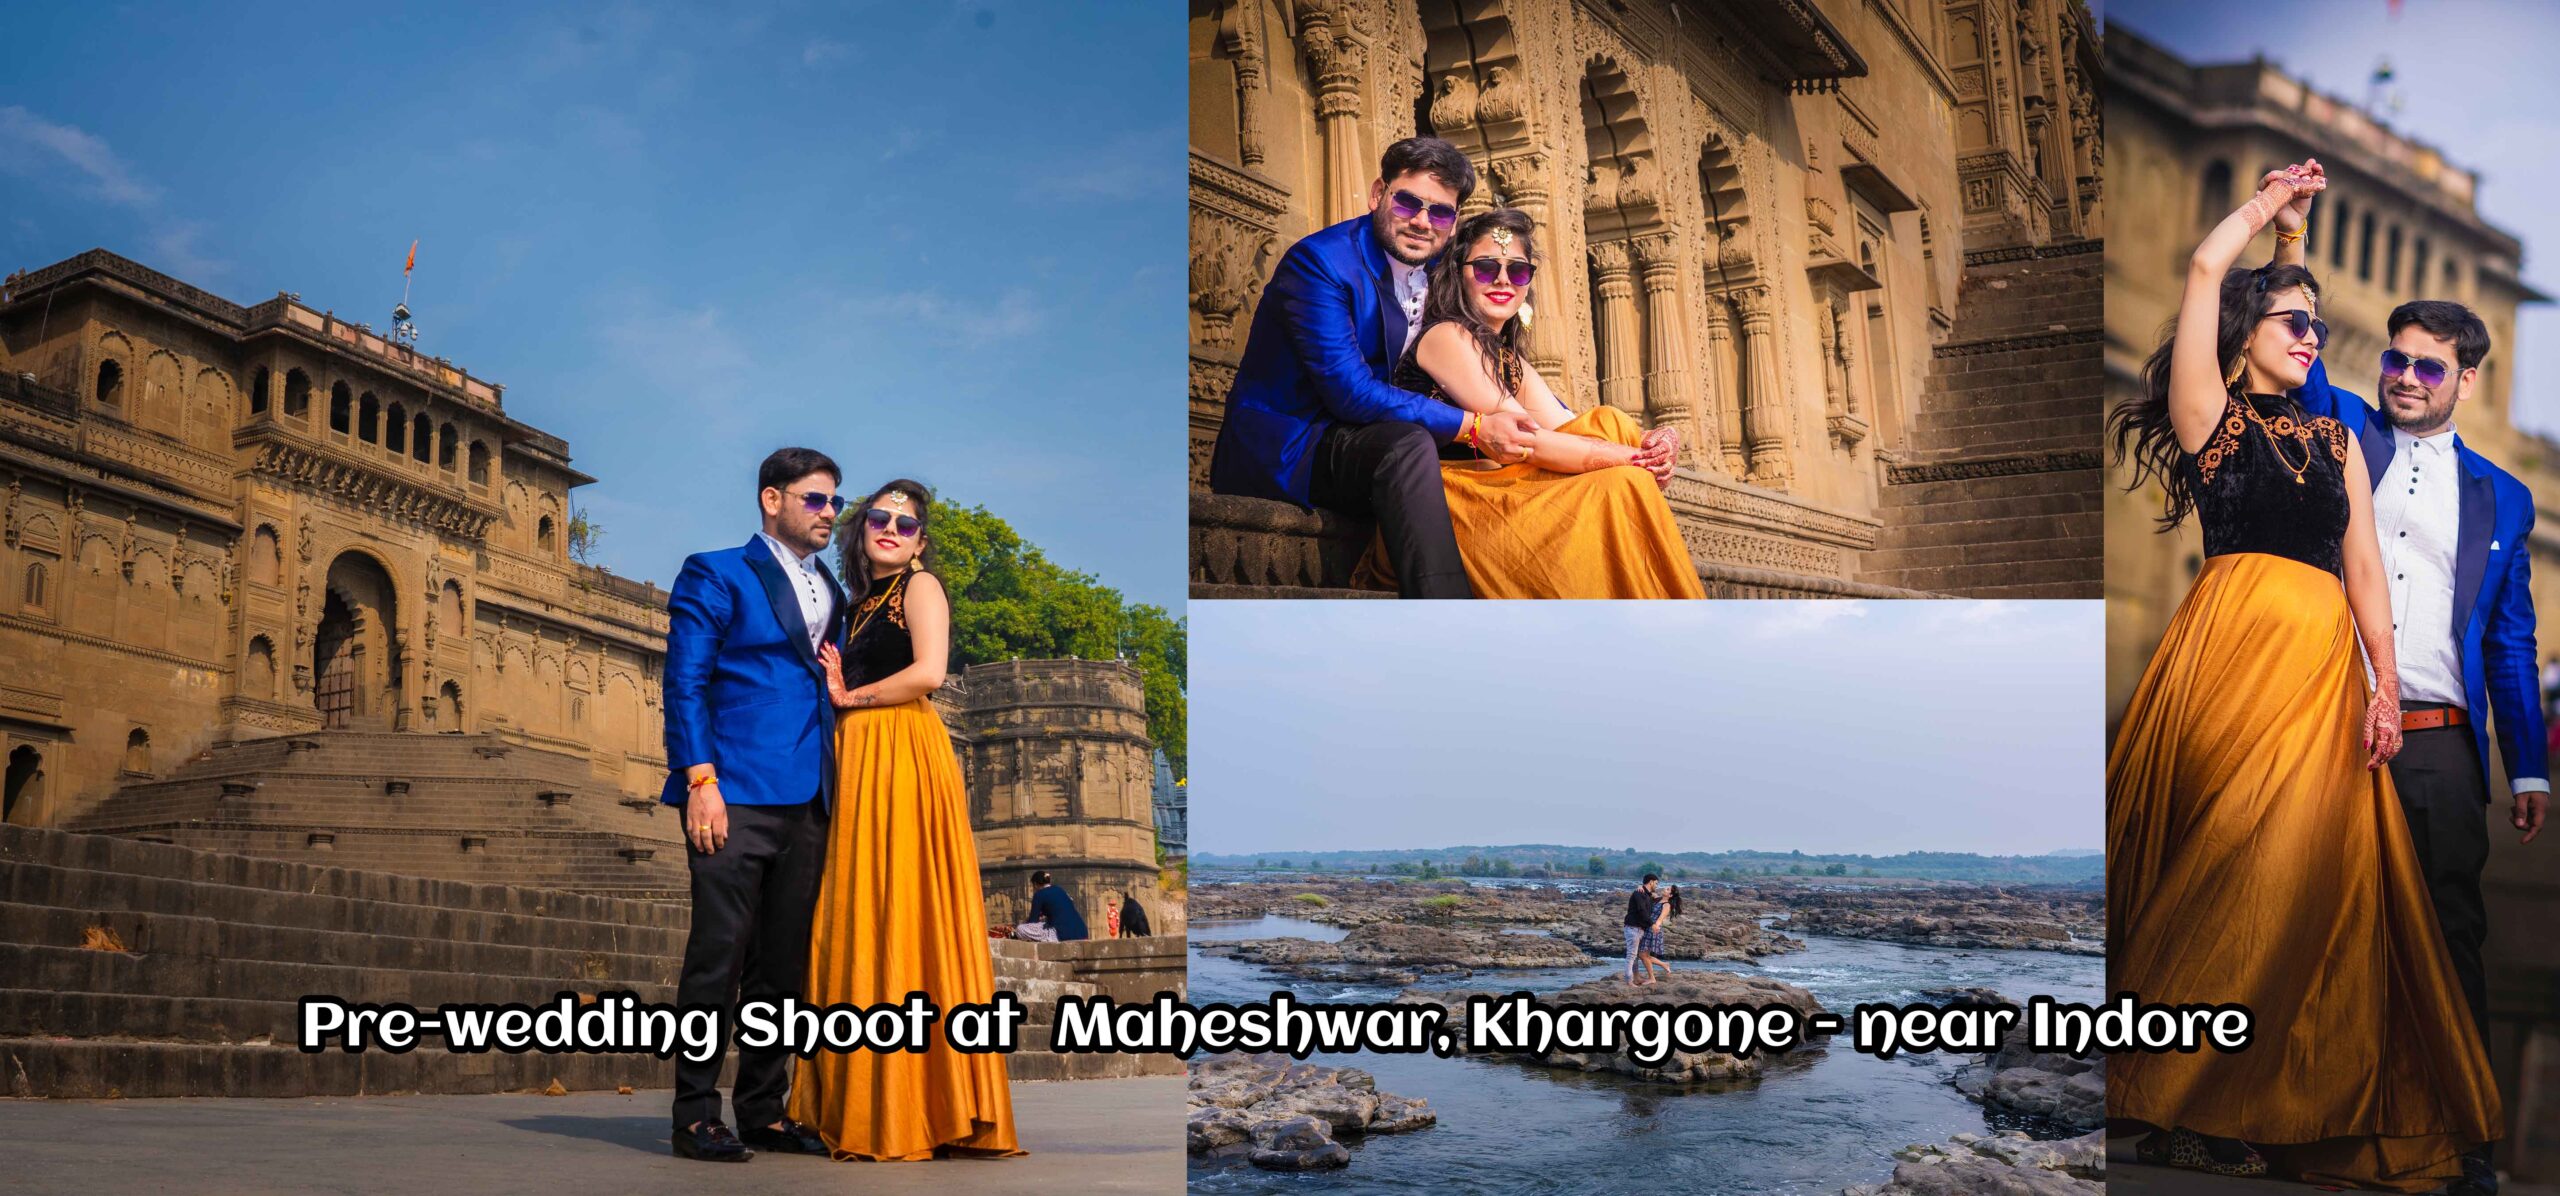 Pre-wedding shoot at Maheshwar, Madhya Pradesh, featuring a couple by the Narmada River with Ahilya Fort in the background, captured by Harsh Studio Photography.